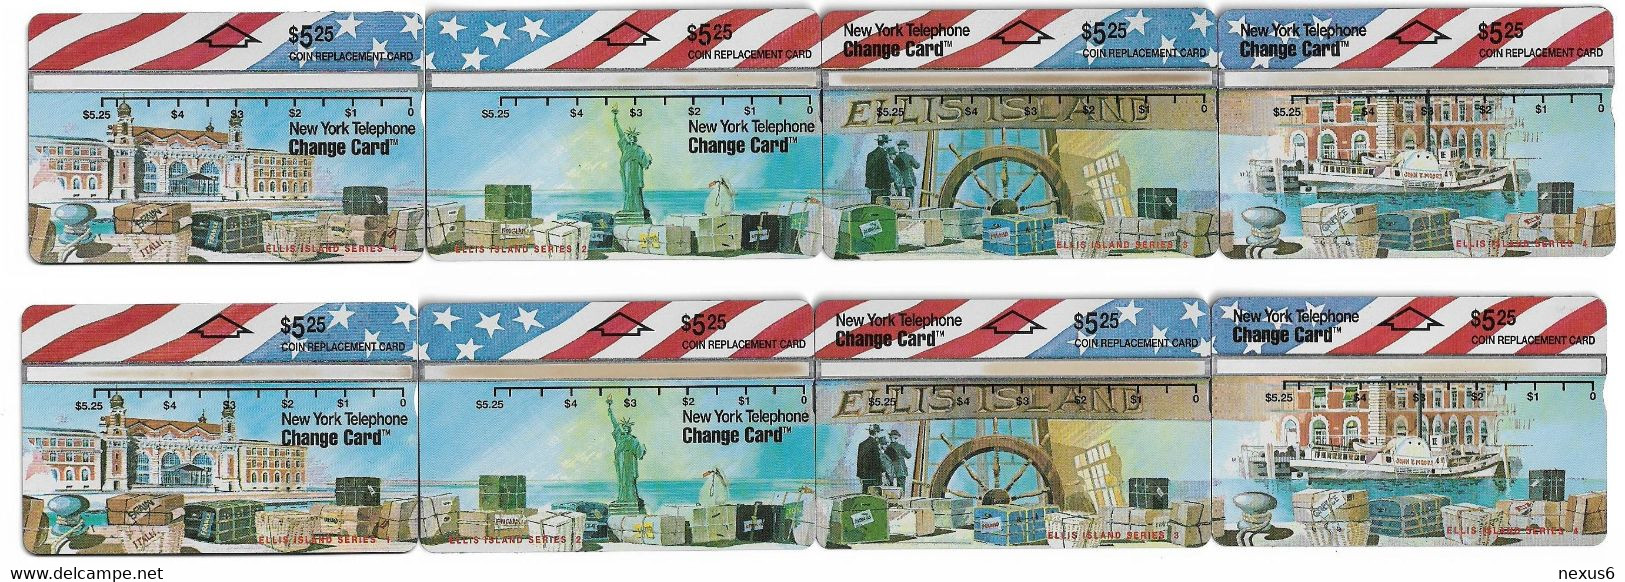 USA - Nynex (L&G) - 2 Full Puzzle Sets Ellis Island (ALL Batch Numbers), 1993, 5.25$, All Mint - [1] Hologramkaarten